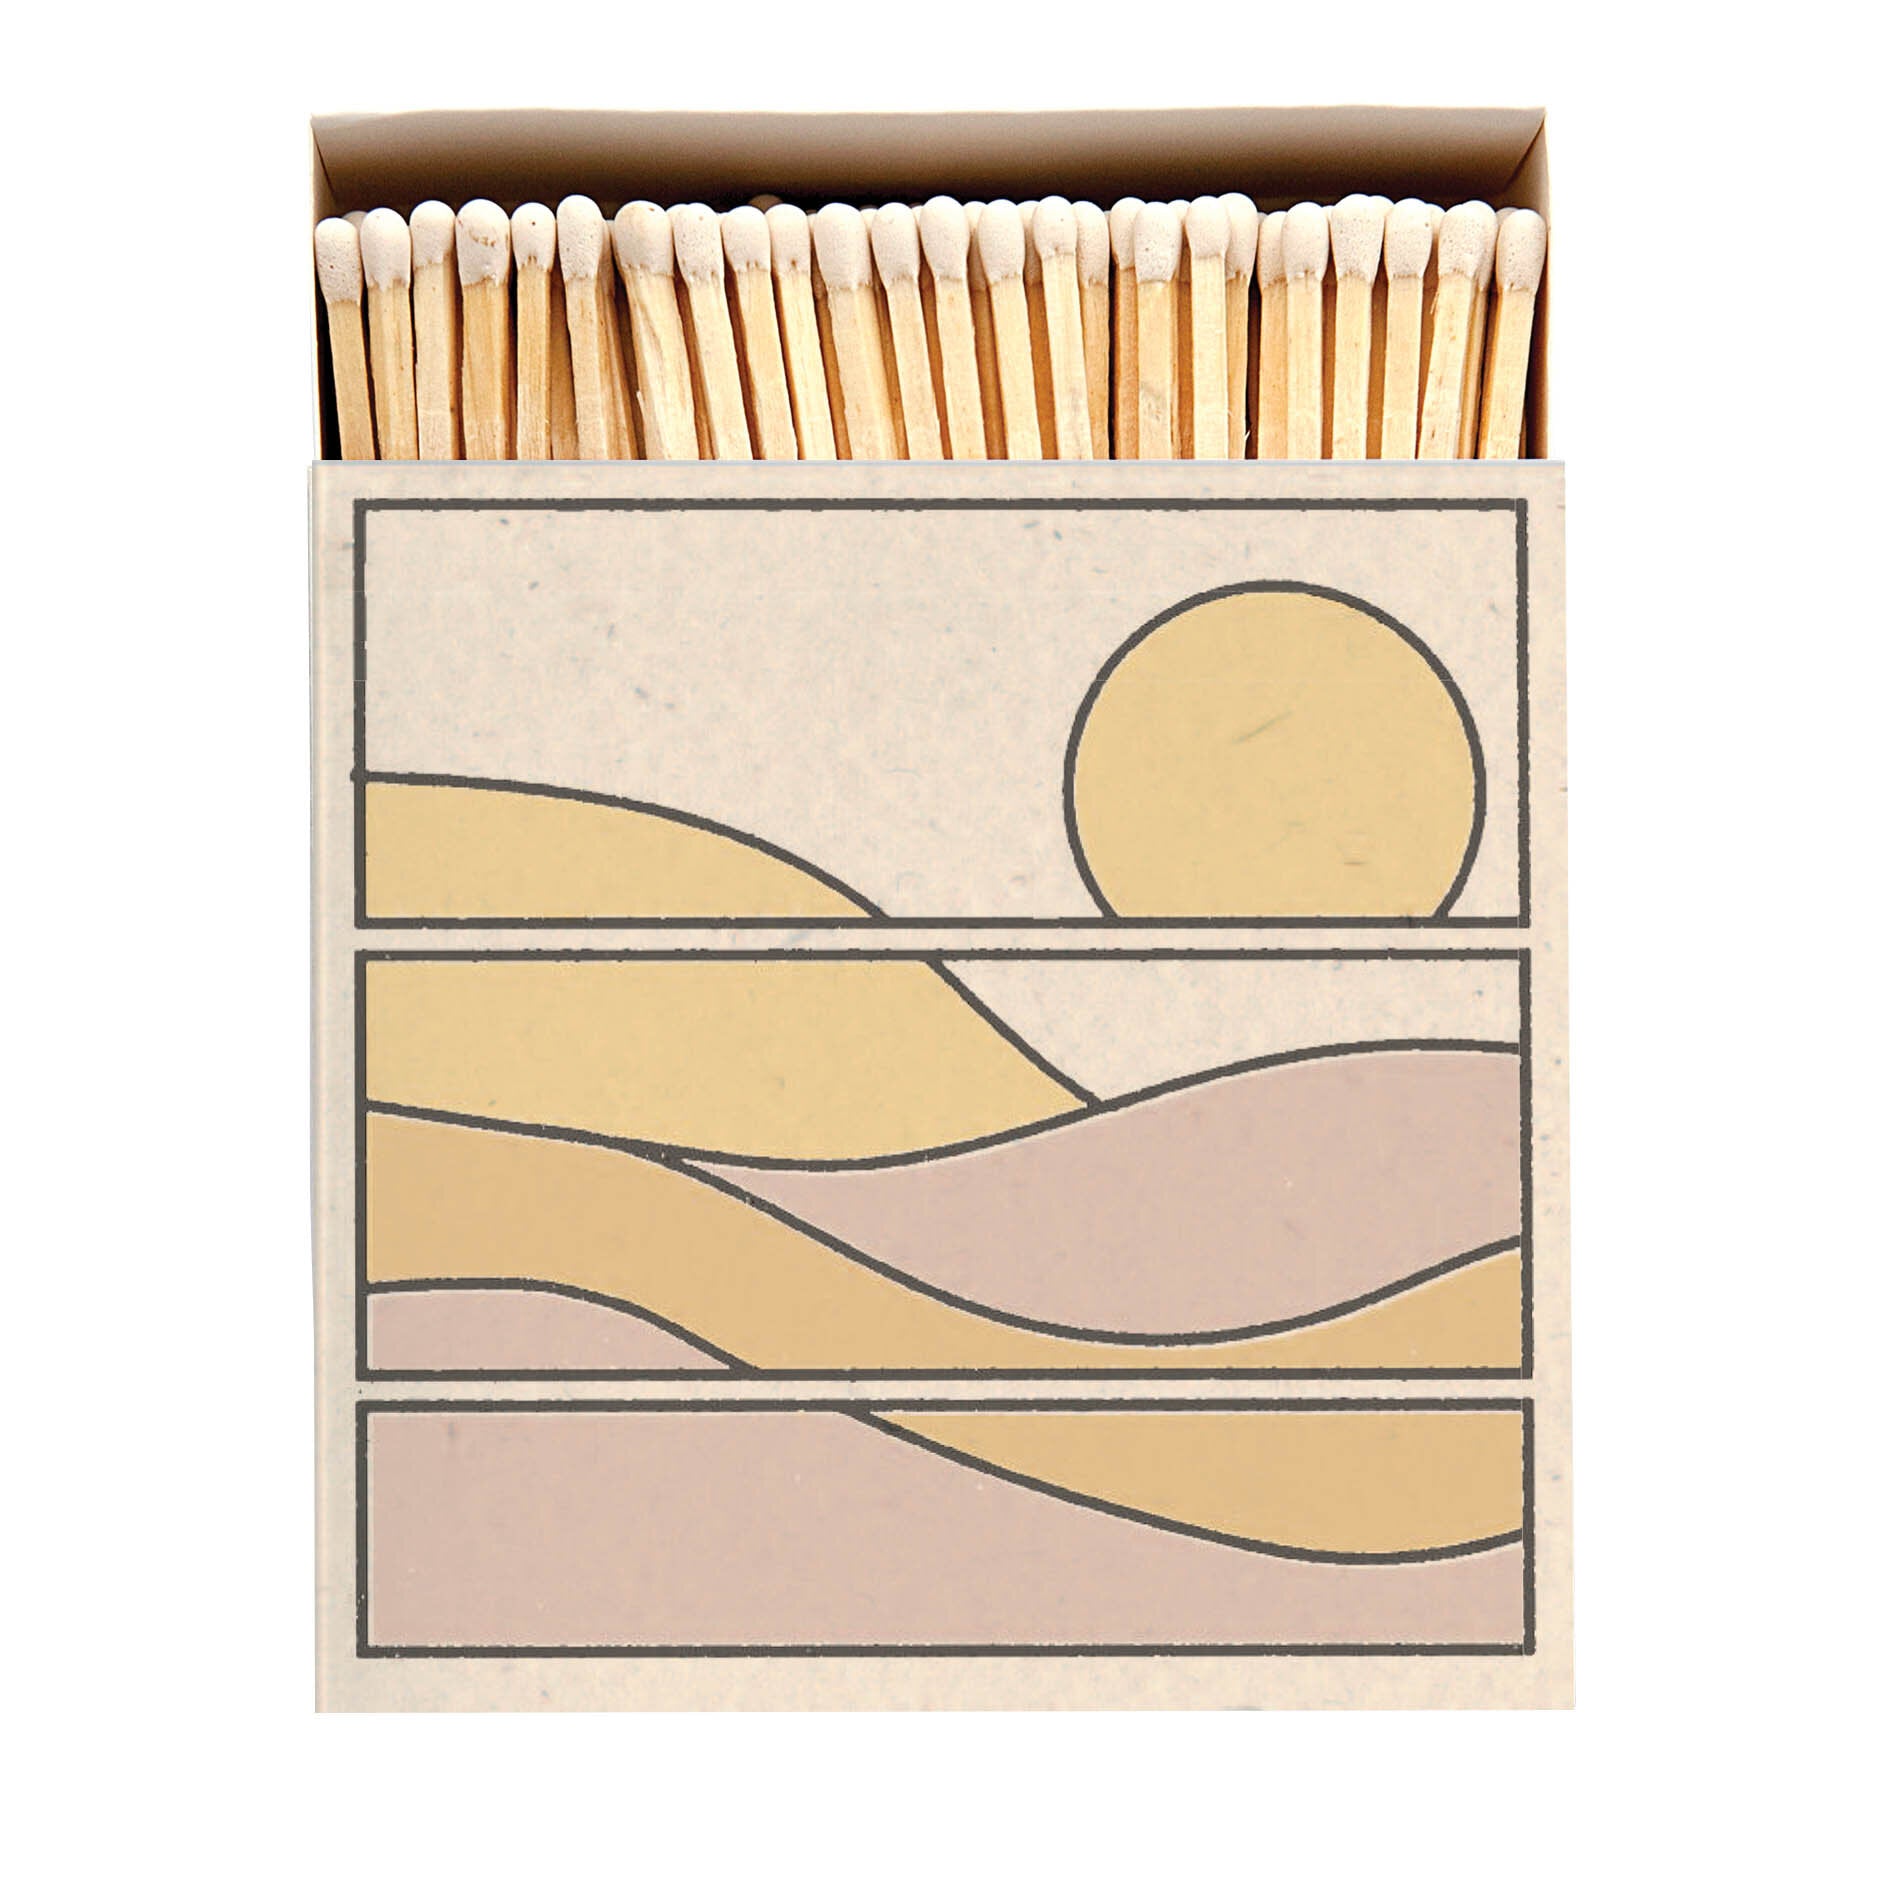 Luxury matches - Landscape - The Bristol Artisan Handmade Sustainable Gifts and Homewares.